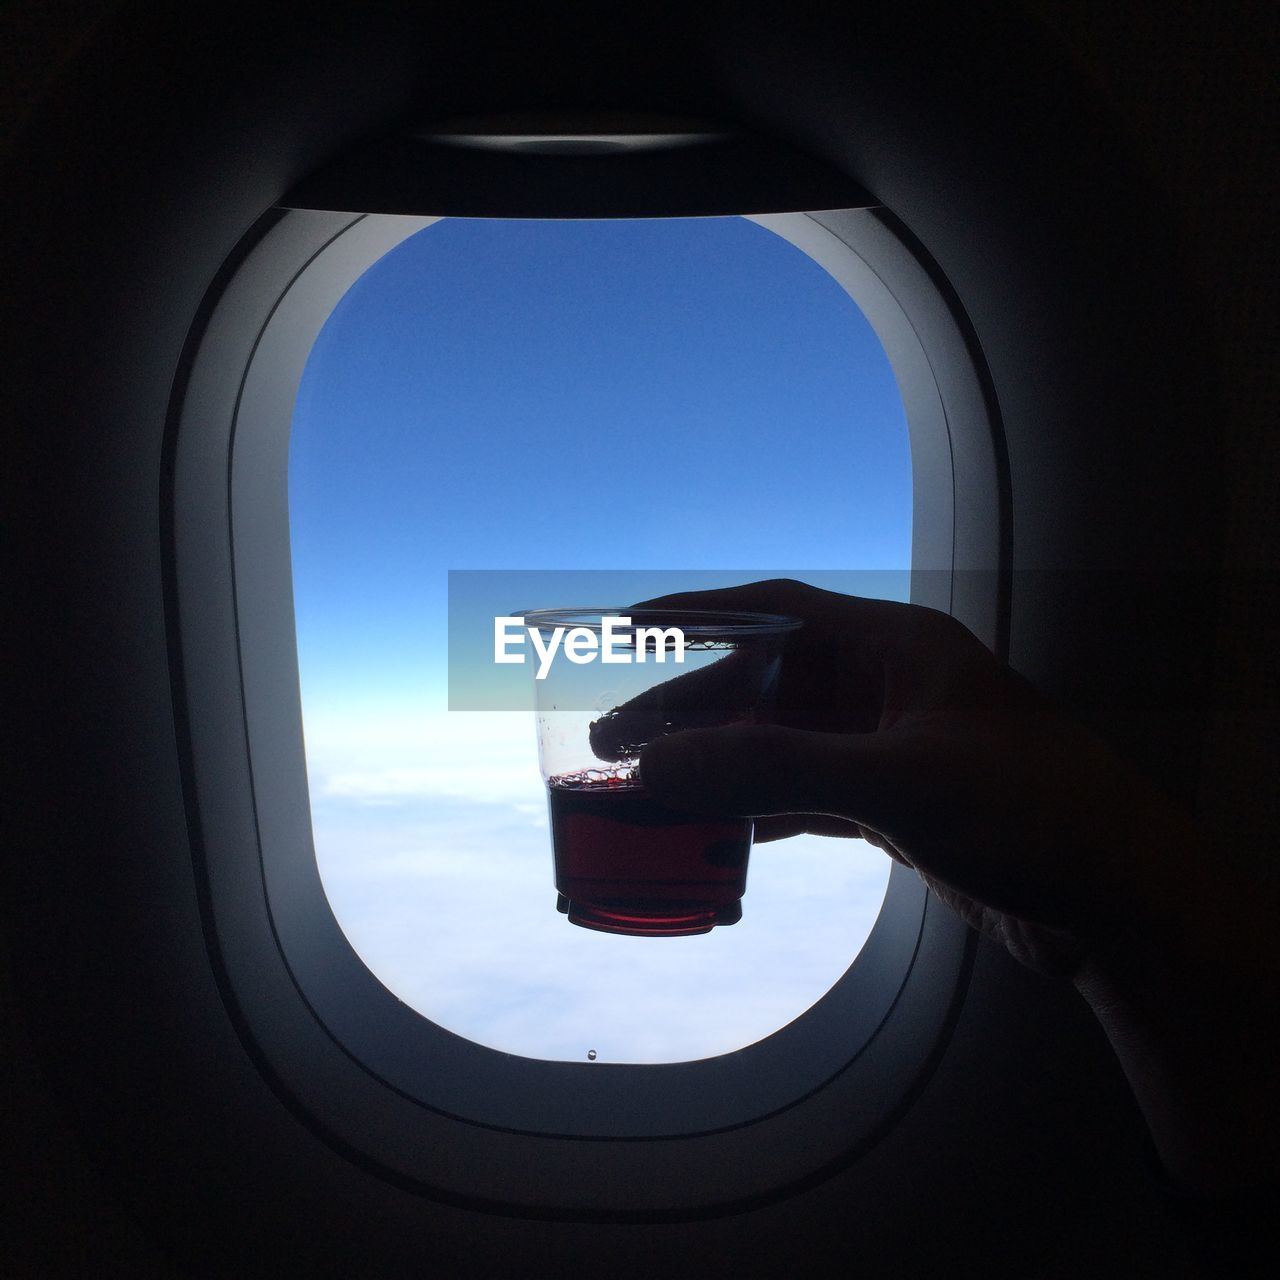 Cropped hand holding drinking glass by window while traveling in airplane